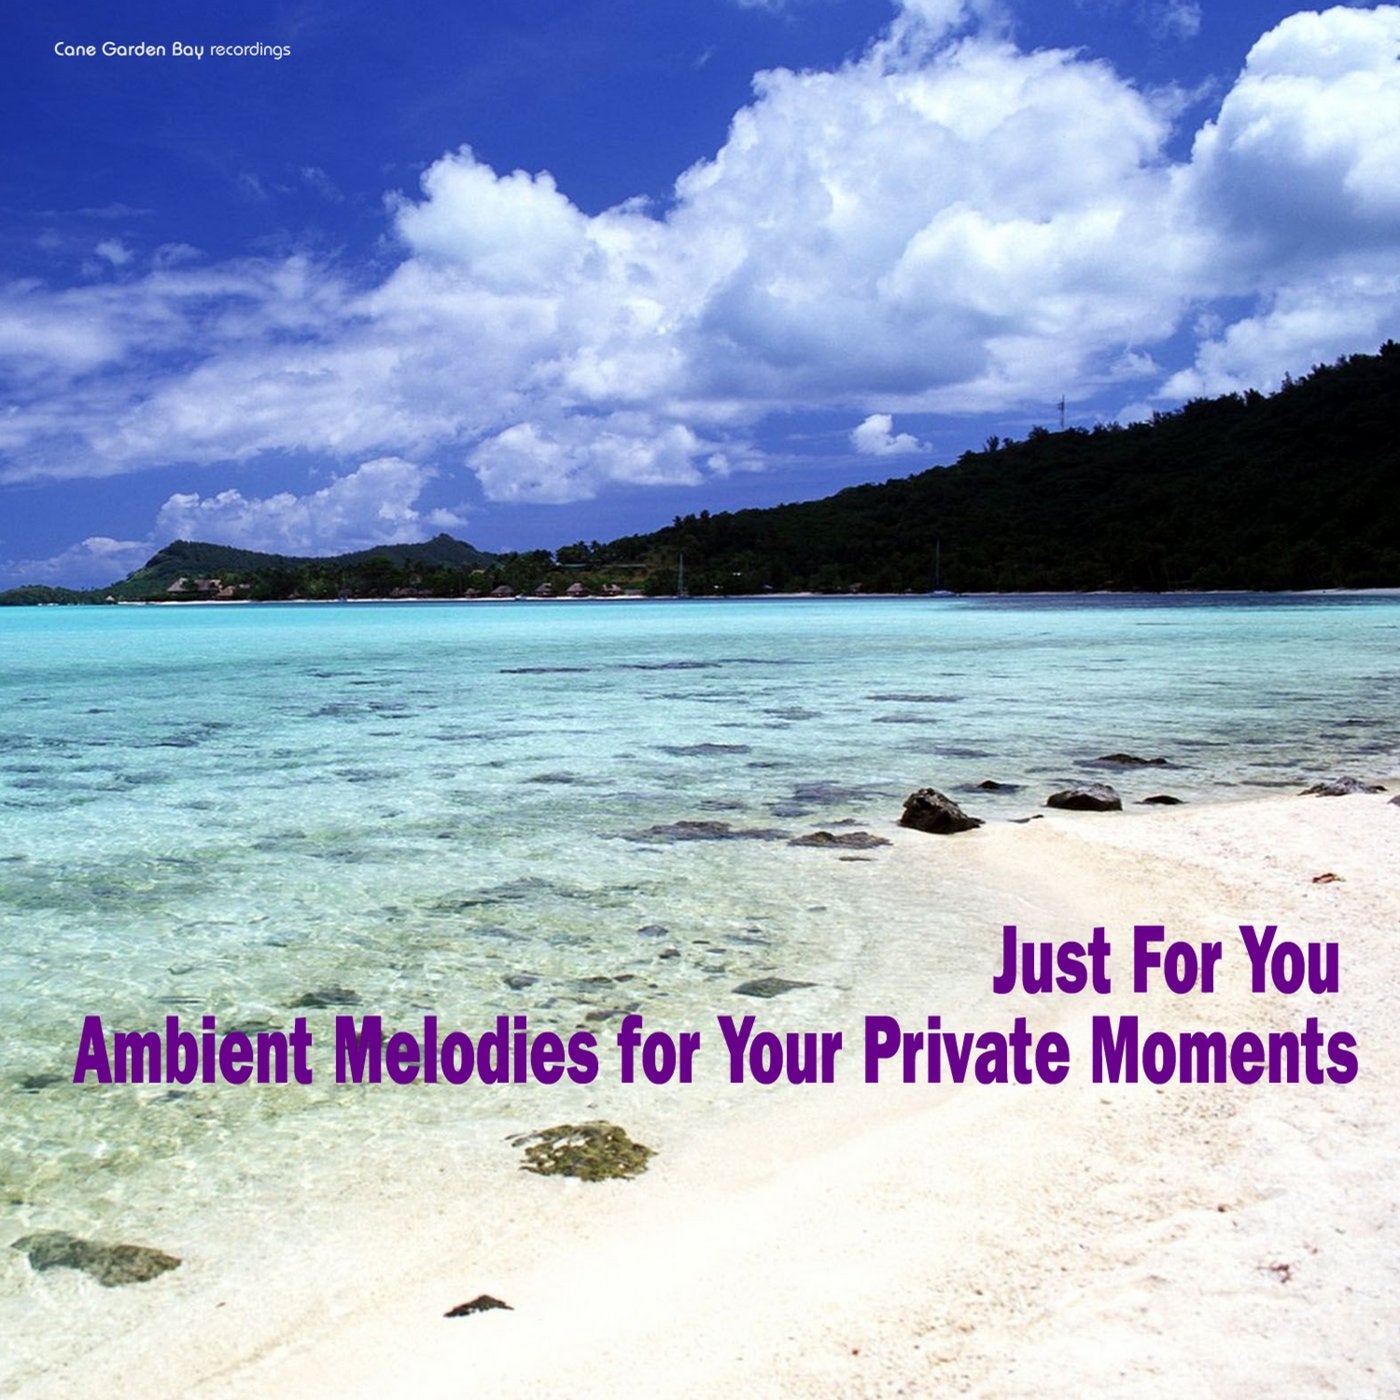 Just for You: Ambient Melodies for Your Private Moments